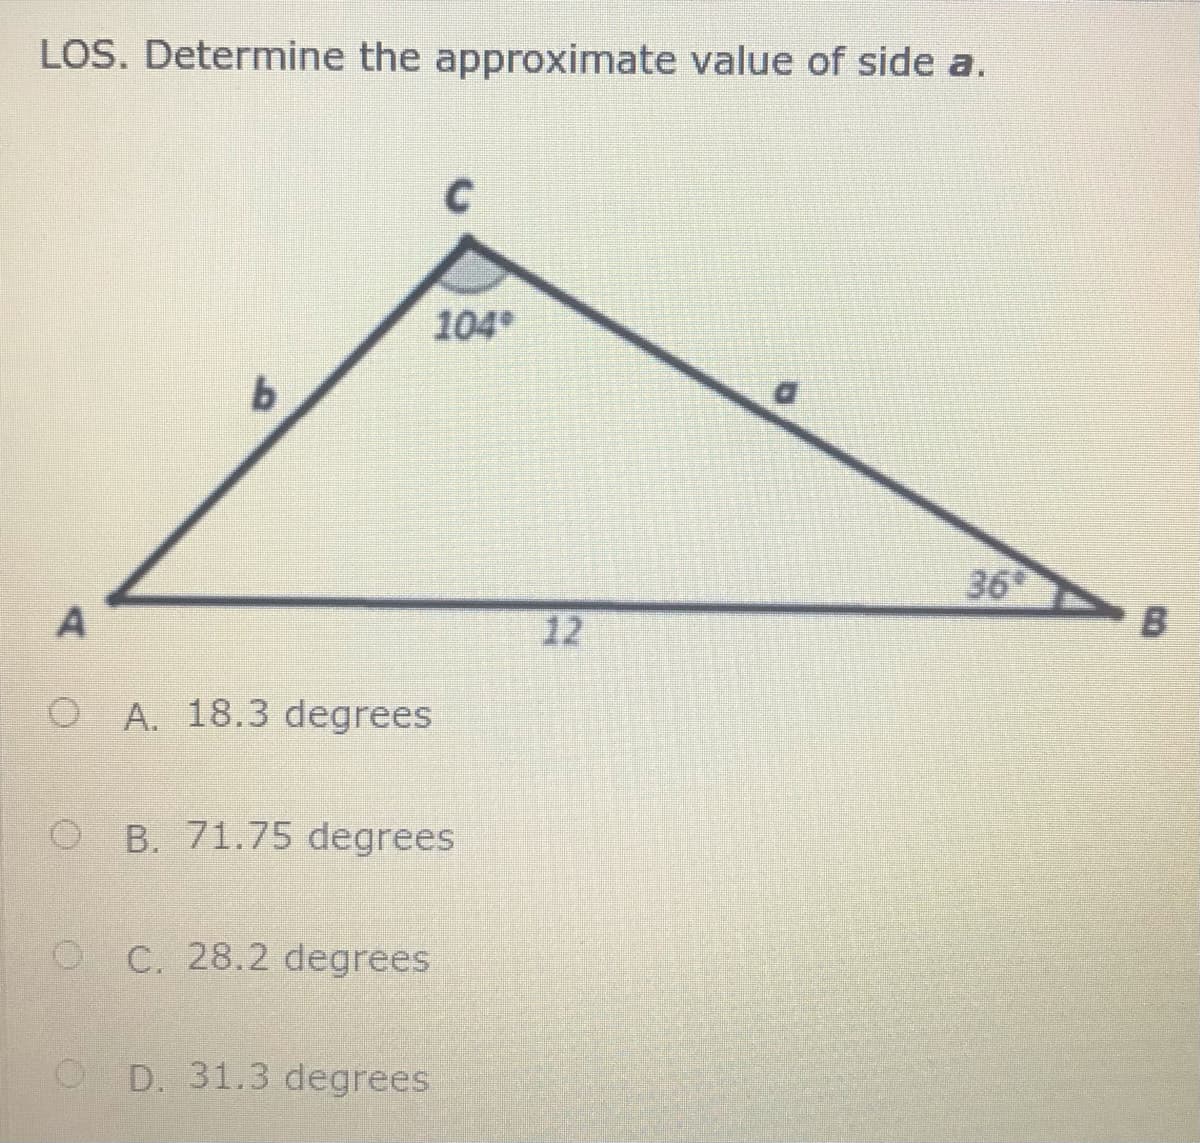 LOS. Determine the approximate value of side a.
104
36
A
12
B
O A. 18.3 degrees
O B. 71.75 degrees
O C. 28.2 degrees
O D. 31.3 degrees
